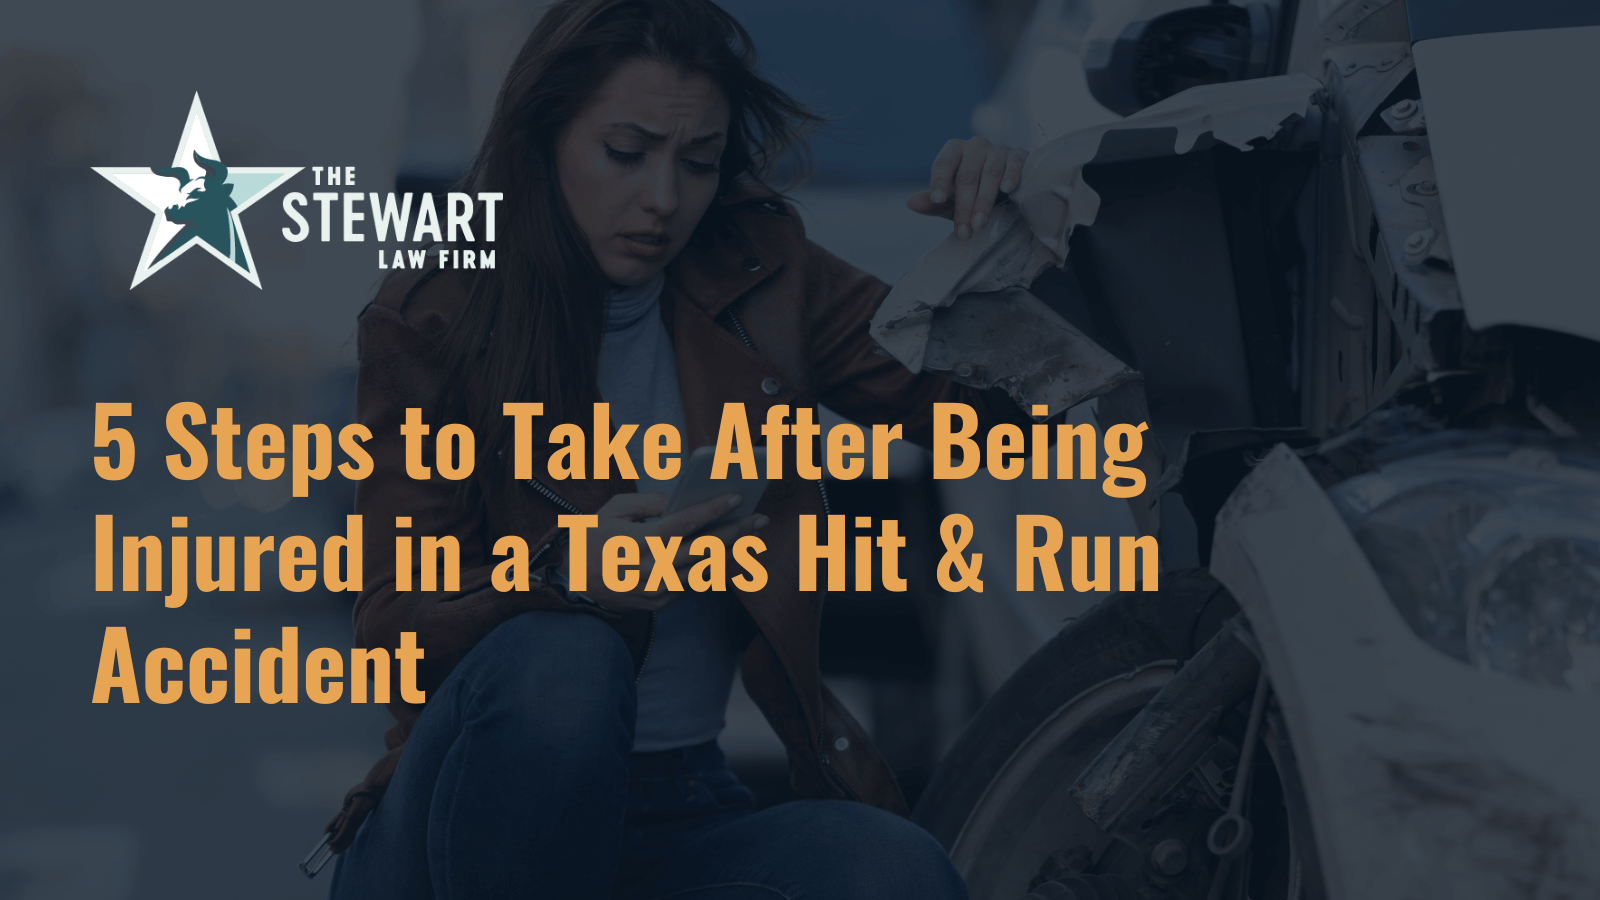 5 Steps to Take After Being Injured in a Texas Hit & Run Accident - austin texas personal injury lawyer